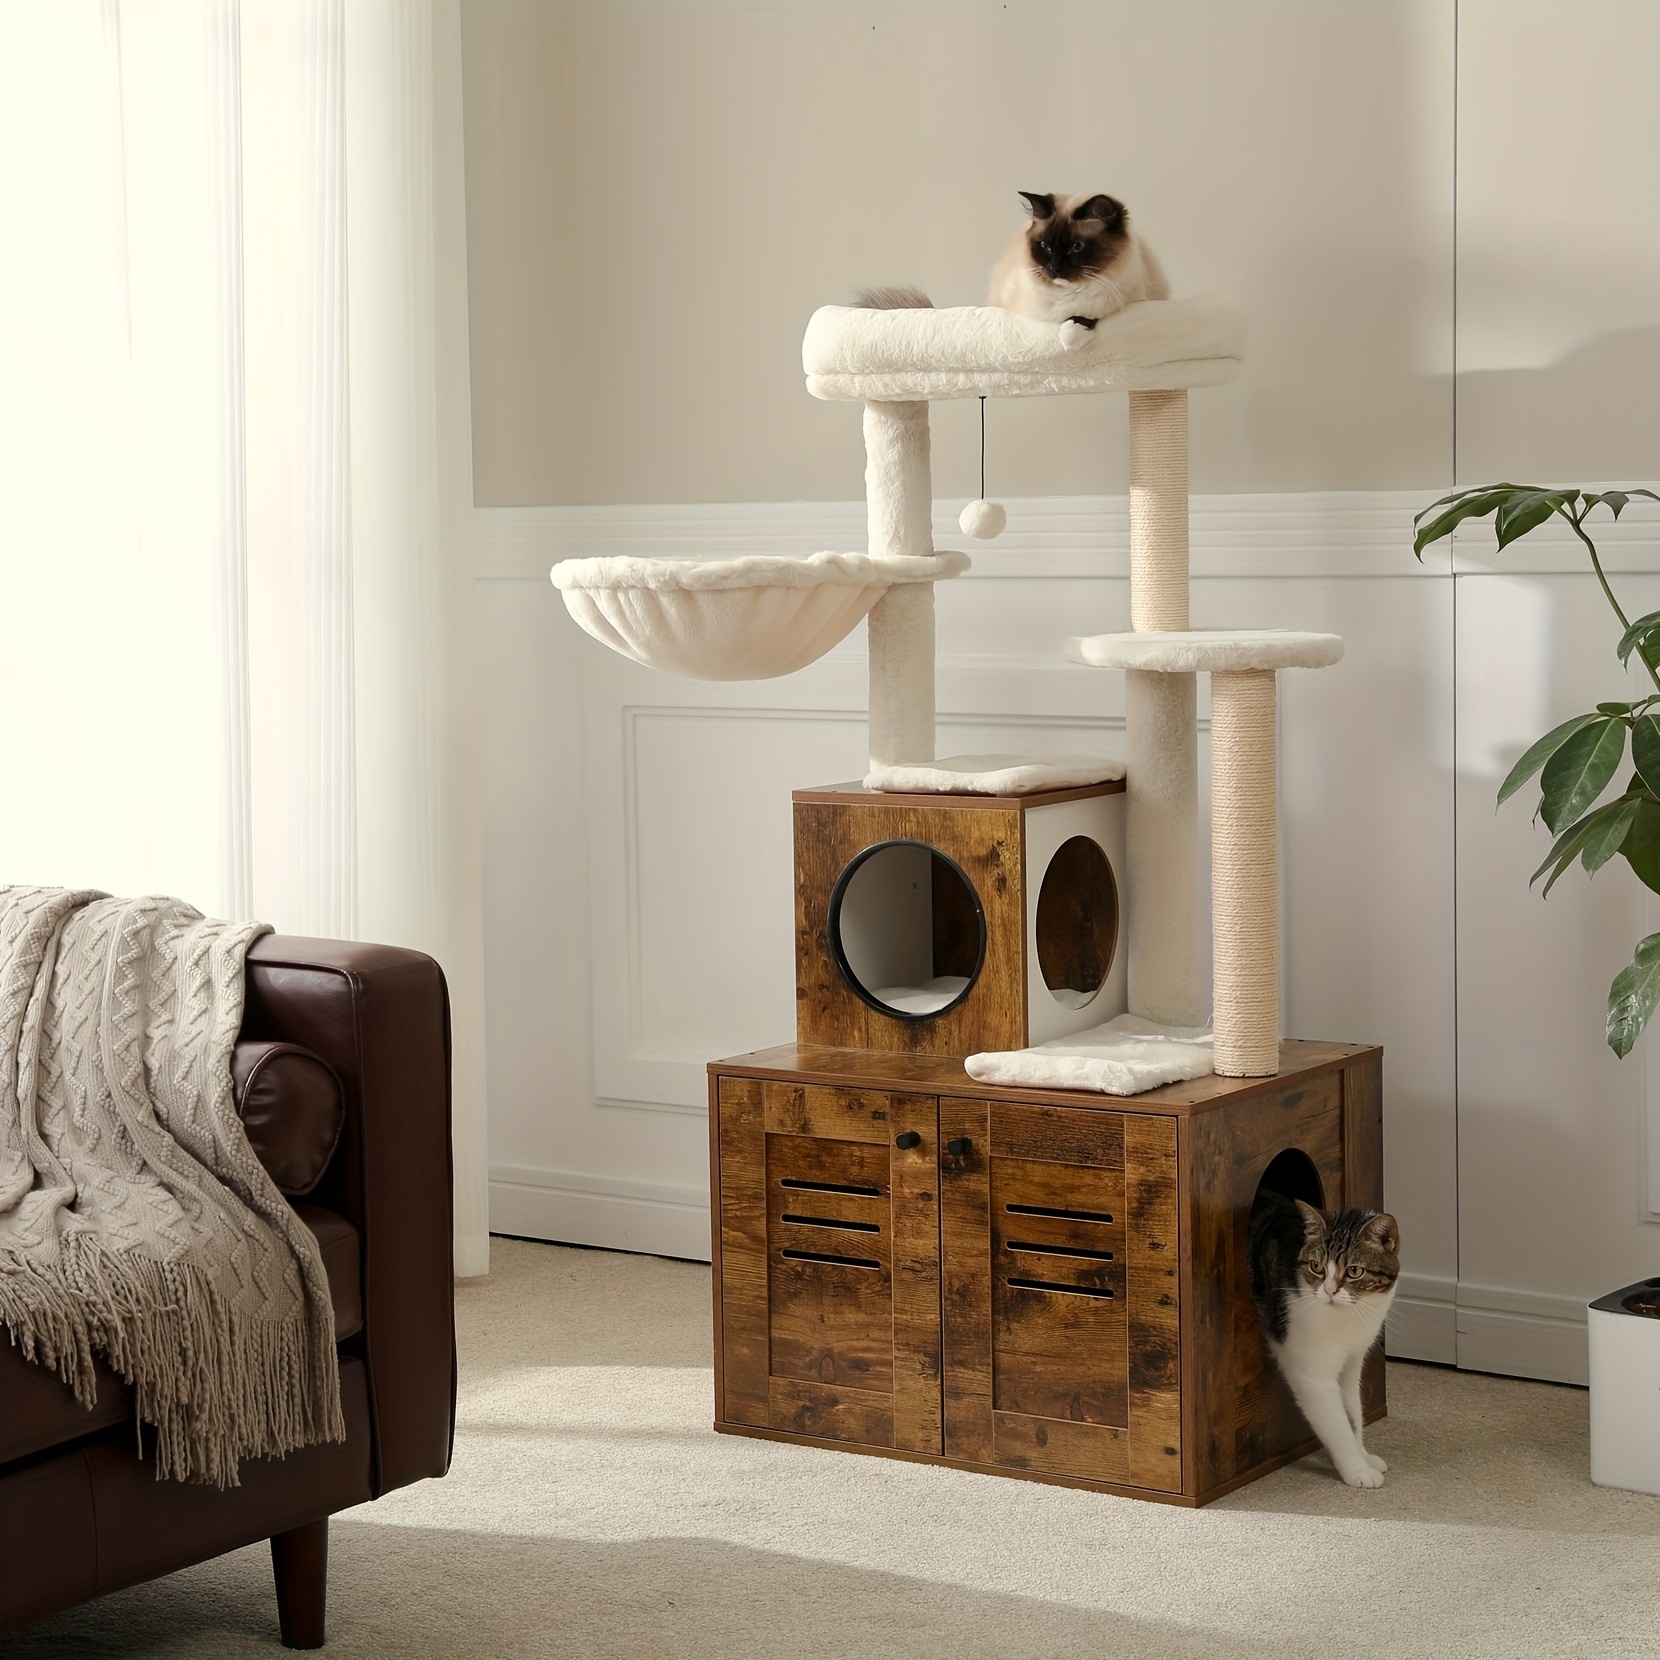 

Pawzroad 50" Modern Cat Tree With Litter Box Enclosure For Indoor Cat Tower For Large/fat Cats With Condo, Wooden Cat Furniture With Large Hammock And Top Perch, Rustic Brown Beige